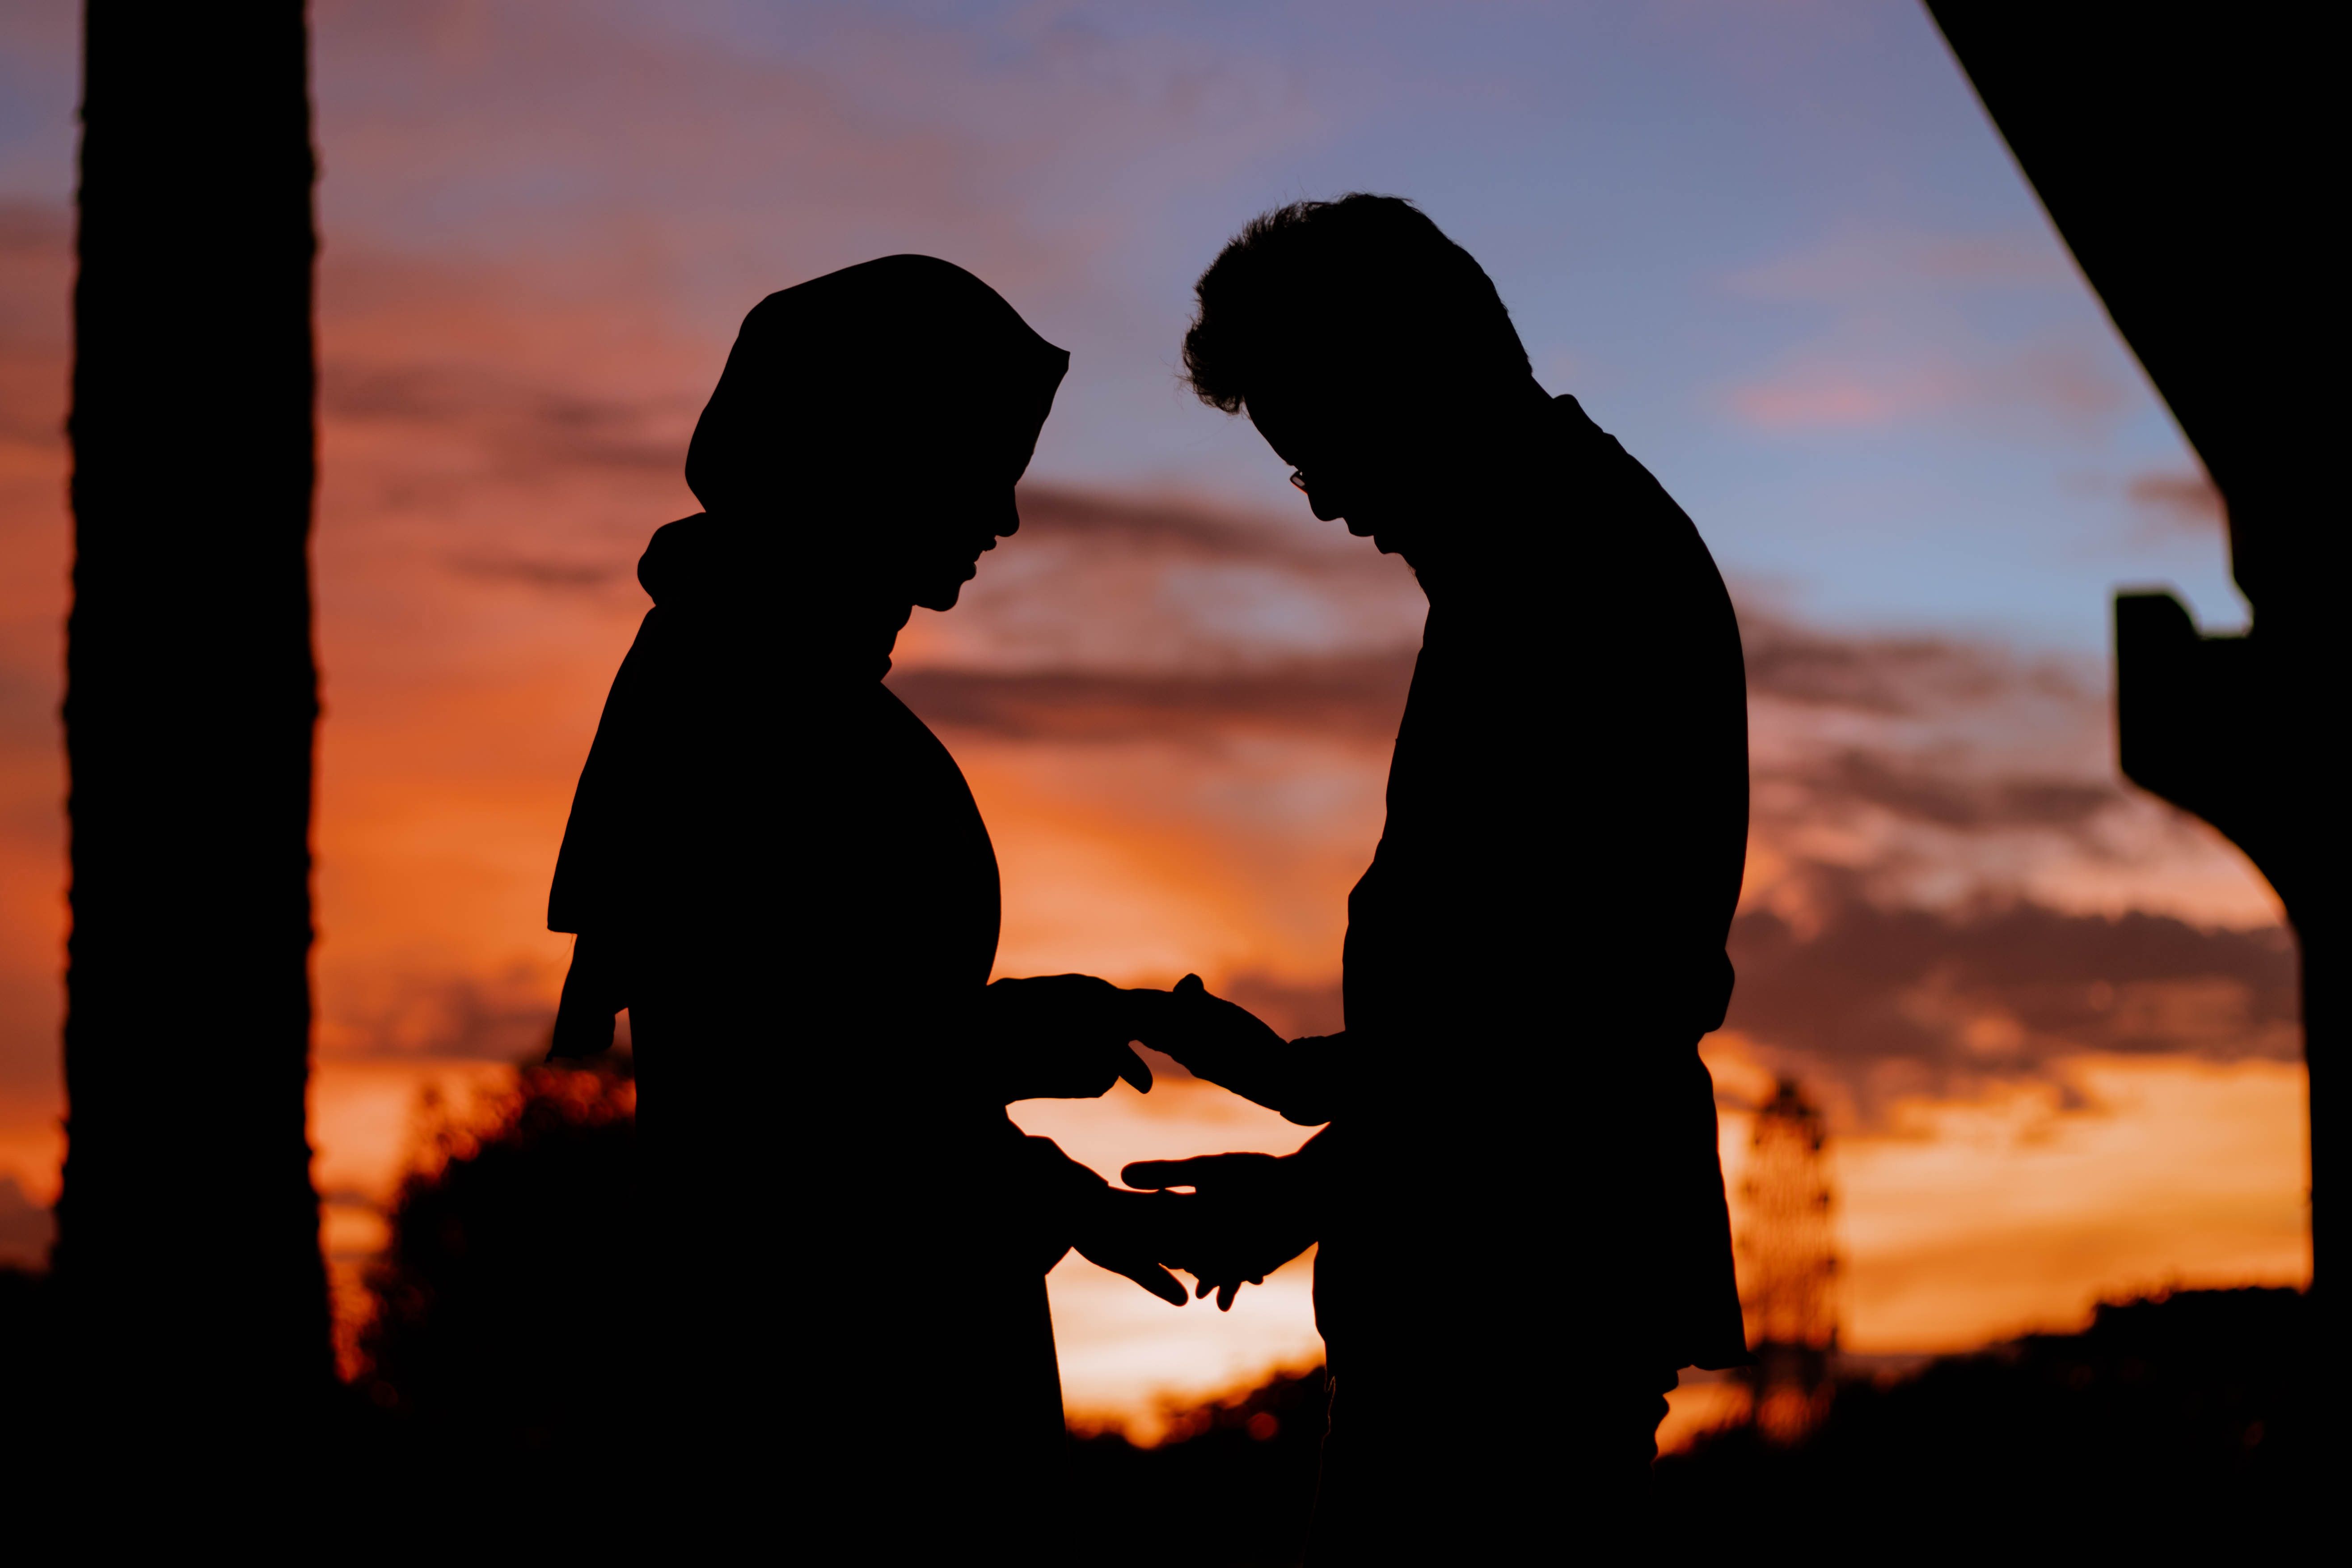 Download 5261x3507 Couple, Sunset, Scenic, Holding Hands, Romance